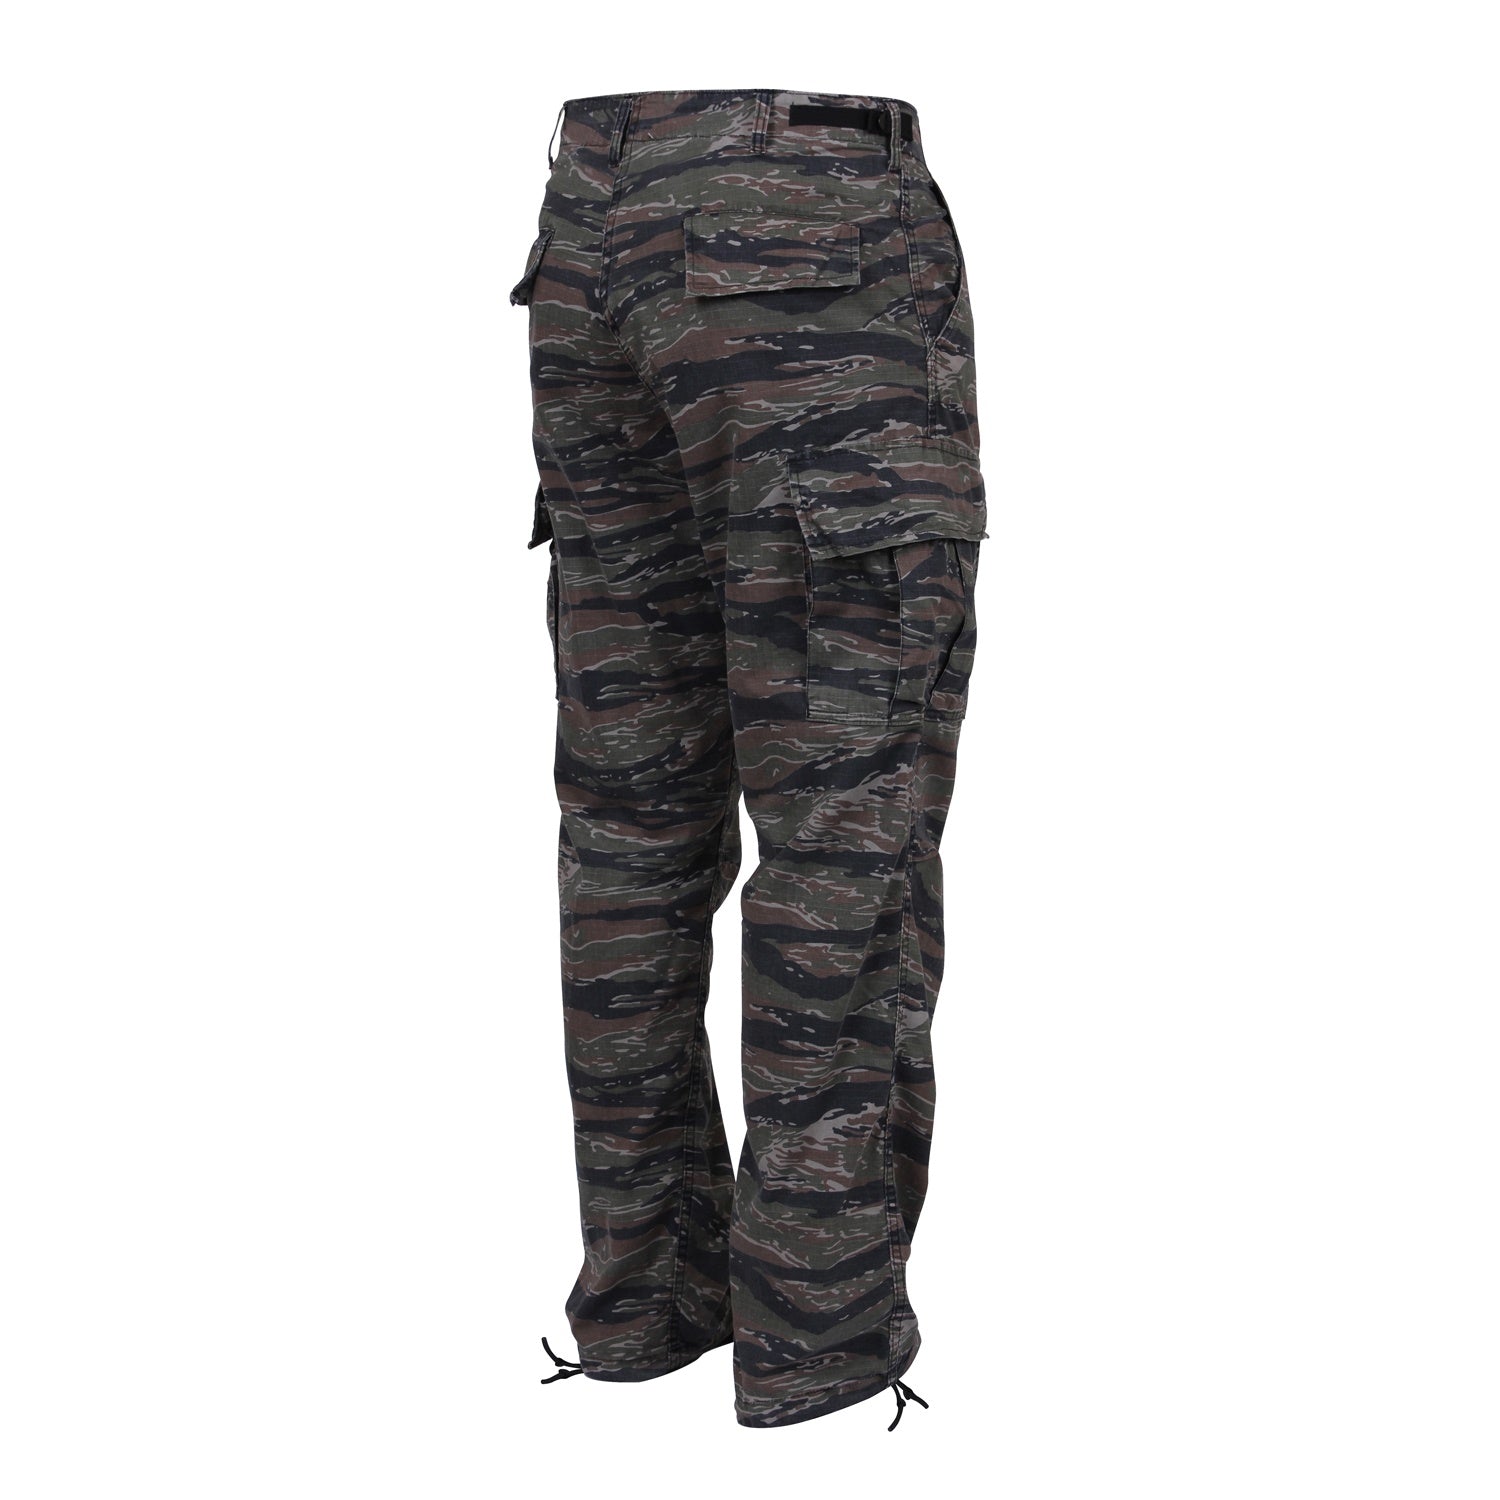 Rothco’s Camo Tactical BDU Pants are made for comfort and built for combat.       Camo BDU Pants Are Built To Withstand Wear And Tear With Long-Lasting 55% Cotton / 45% Polyester Material     Reinforced Seat And Knees Provide Unparalleled Resiliency While Shooting, Working Or Performing Any Outdoor Task